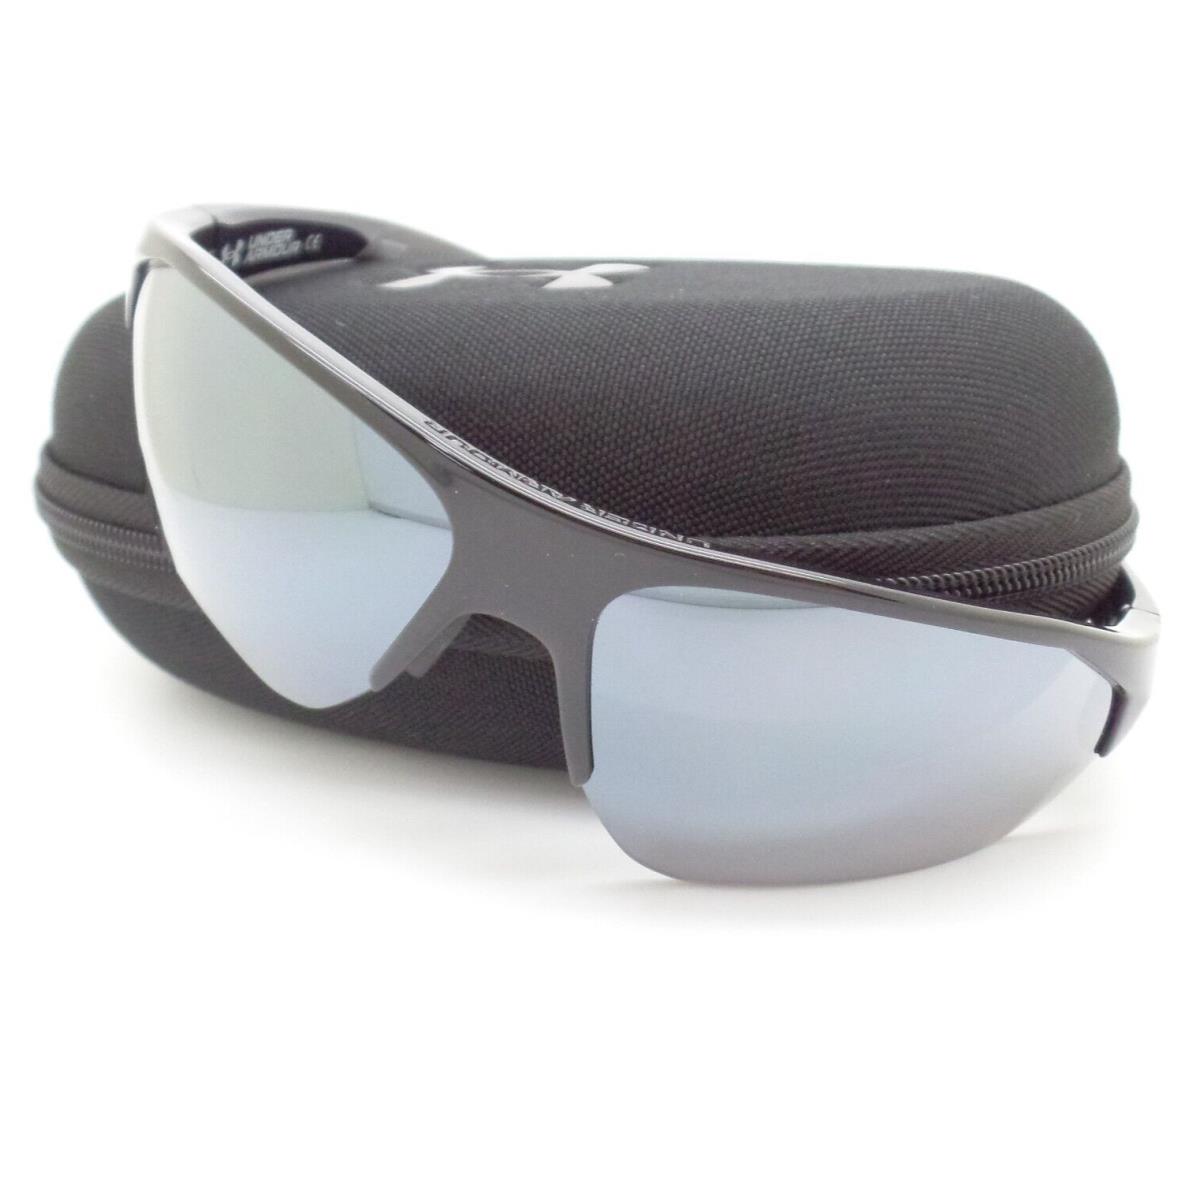 Under Armour Playmaker 0001 GS 807QI Gloss Black Silver Sunglasses